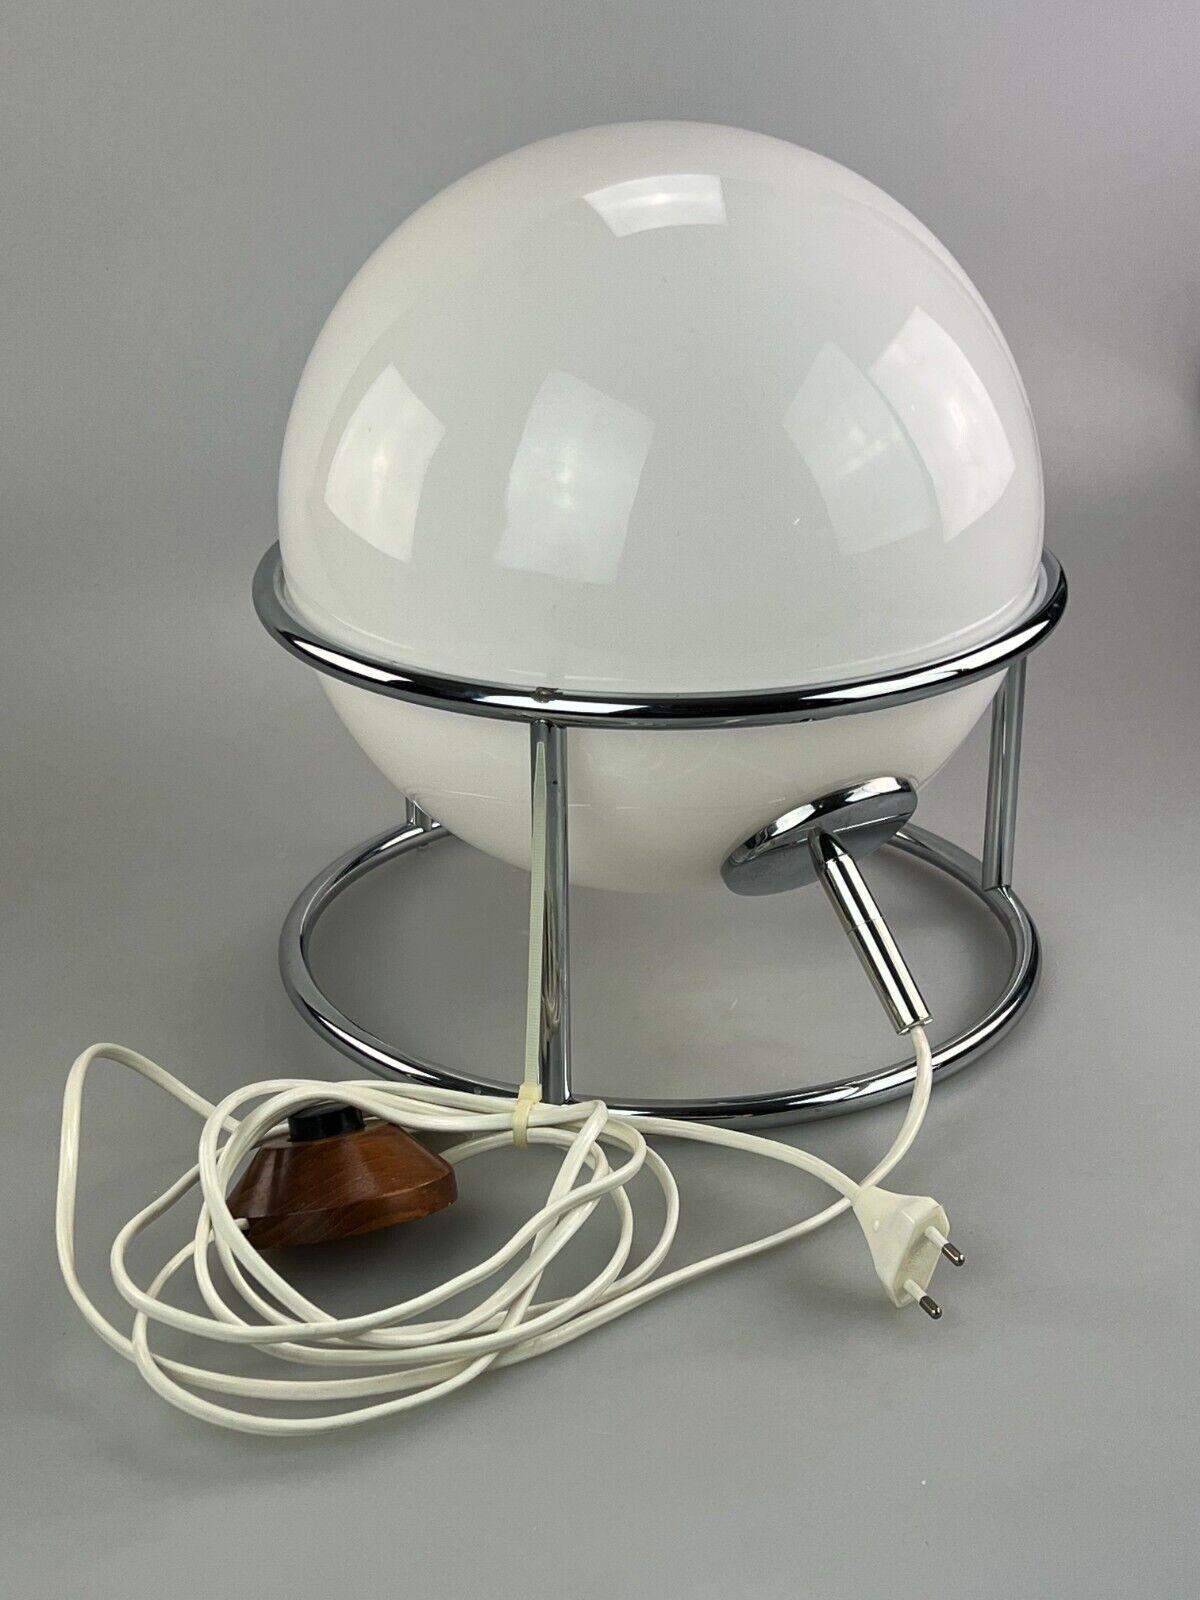 60s 70s Ball Lamp Lamp Light Table Lamp Space Age Design Glass Metal 6